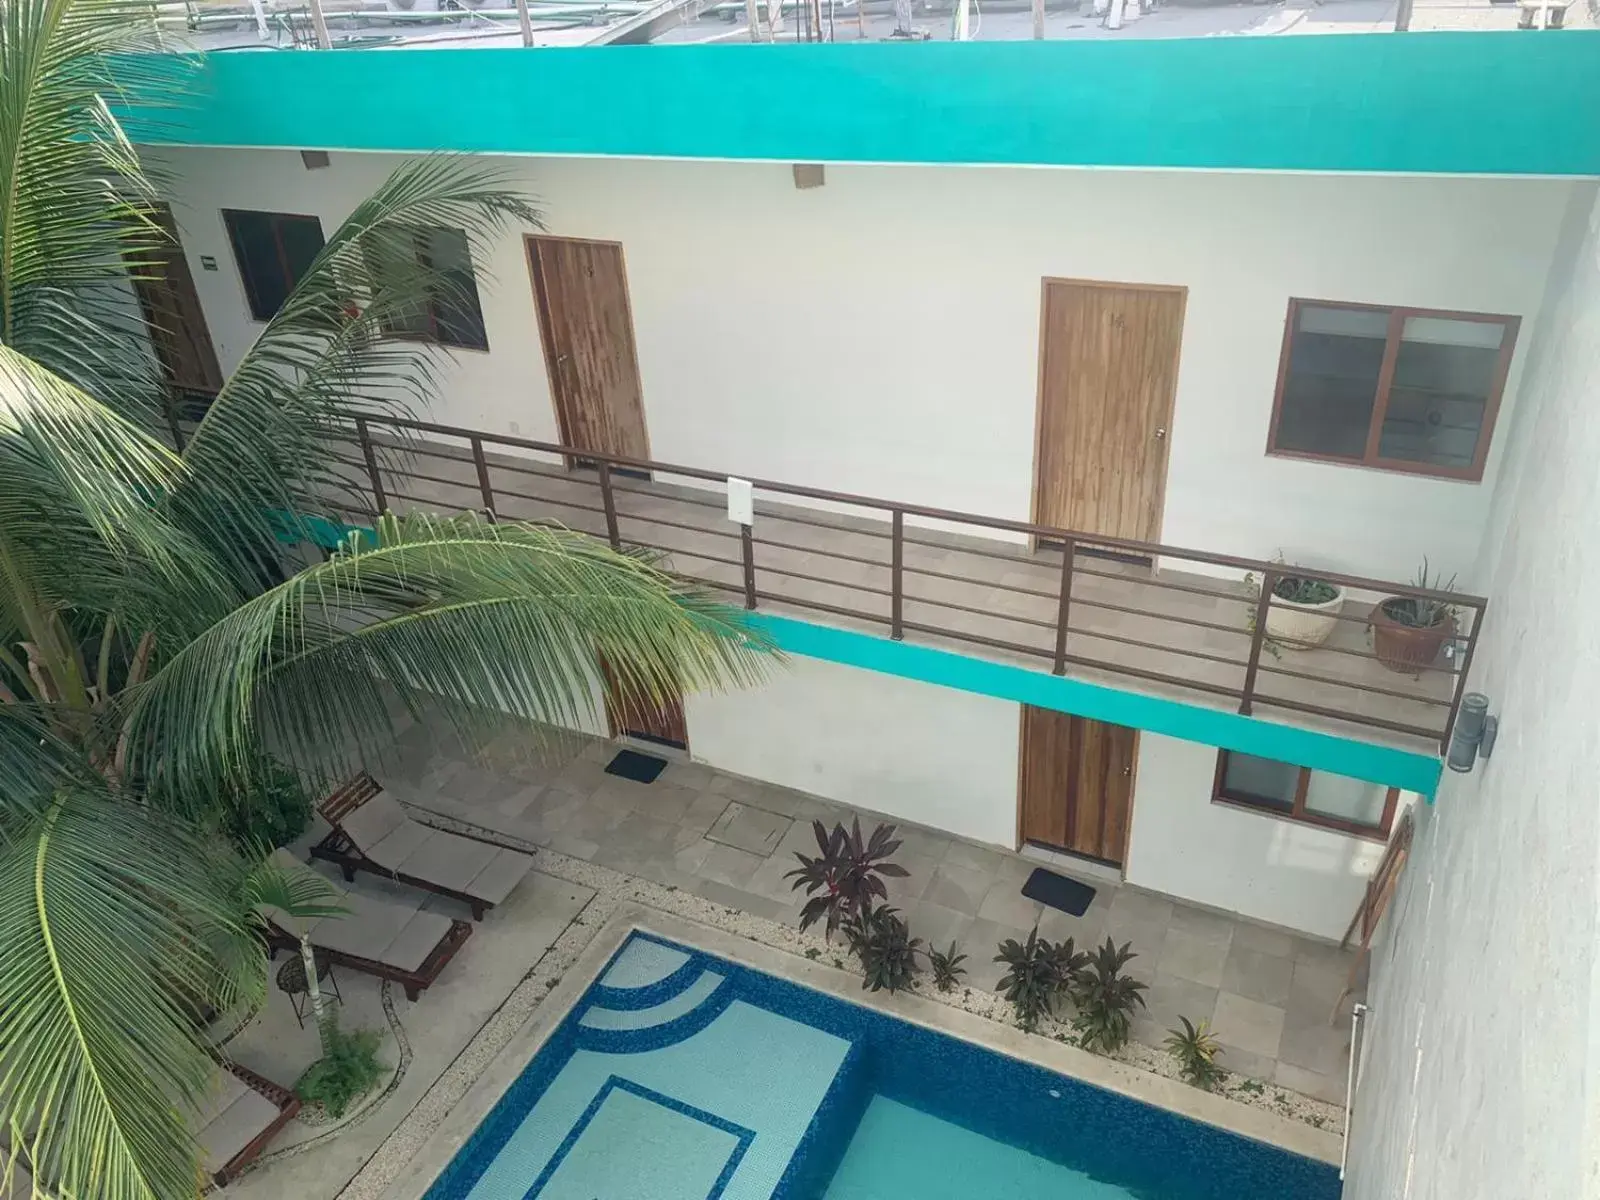 Property building, Pool View in Los Arcos Hotel - TULUM